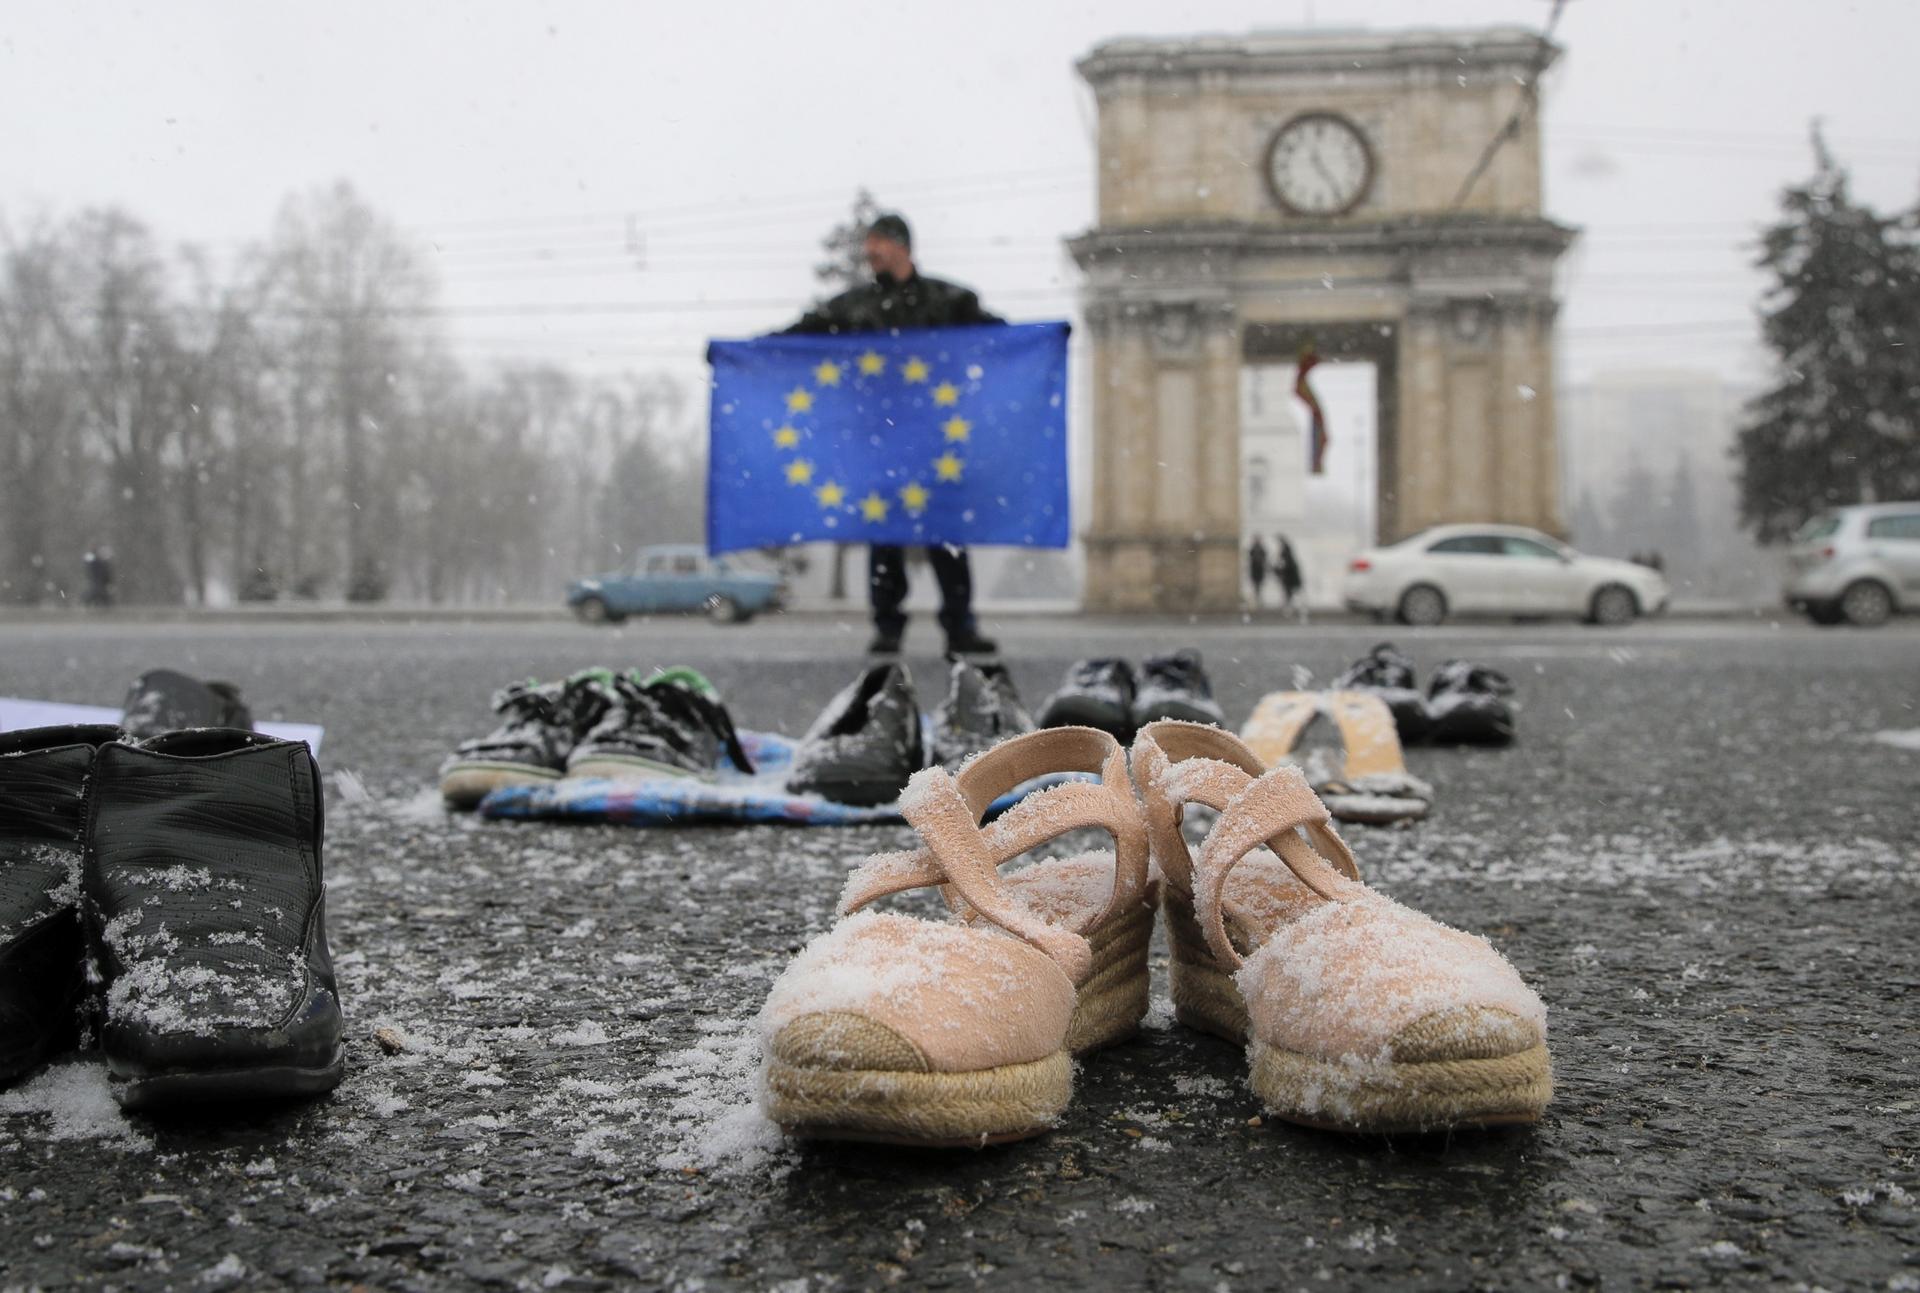 A few pairs of shoes with snow on them lie in a square near a man with an EU flag with blue and yellow colors. 